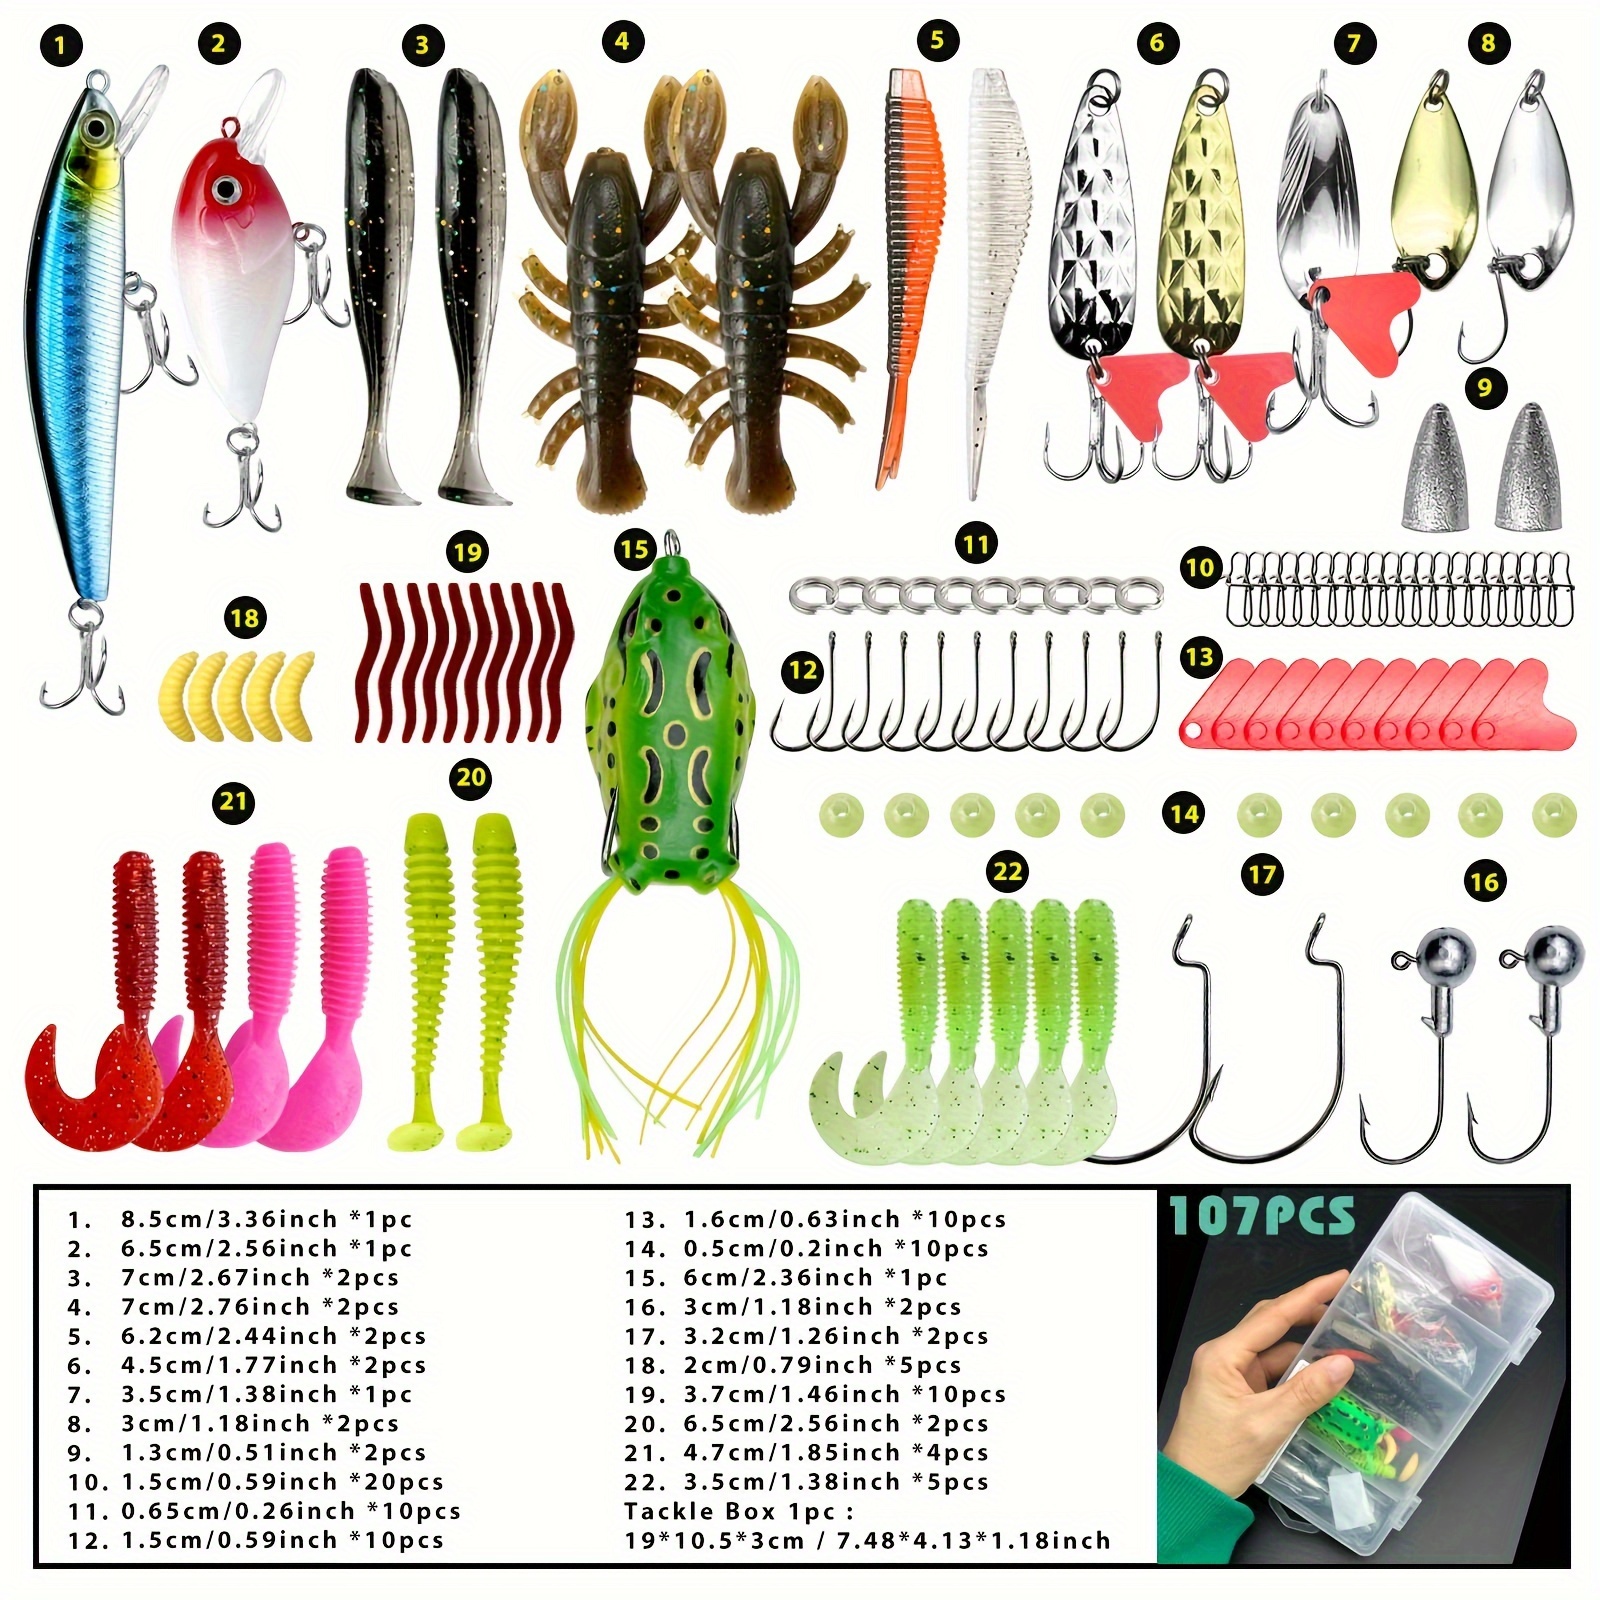  Lnkdeya Fishing Lures Kit Set for Bass - Lures for  Trout,Salmon,Including Spoon Lures,Soft Plastic Worms,  CrankBait,Jigs,Topwater Lures with Free Tackle Box : Sports & Outdoors